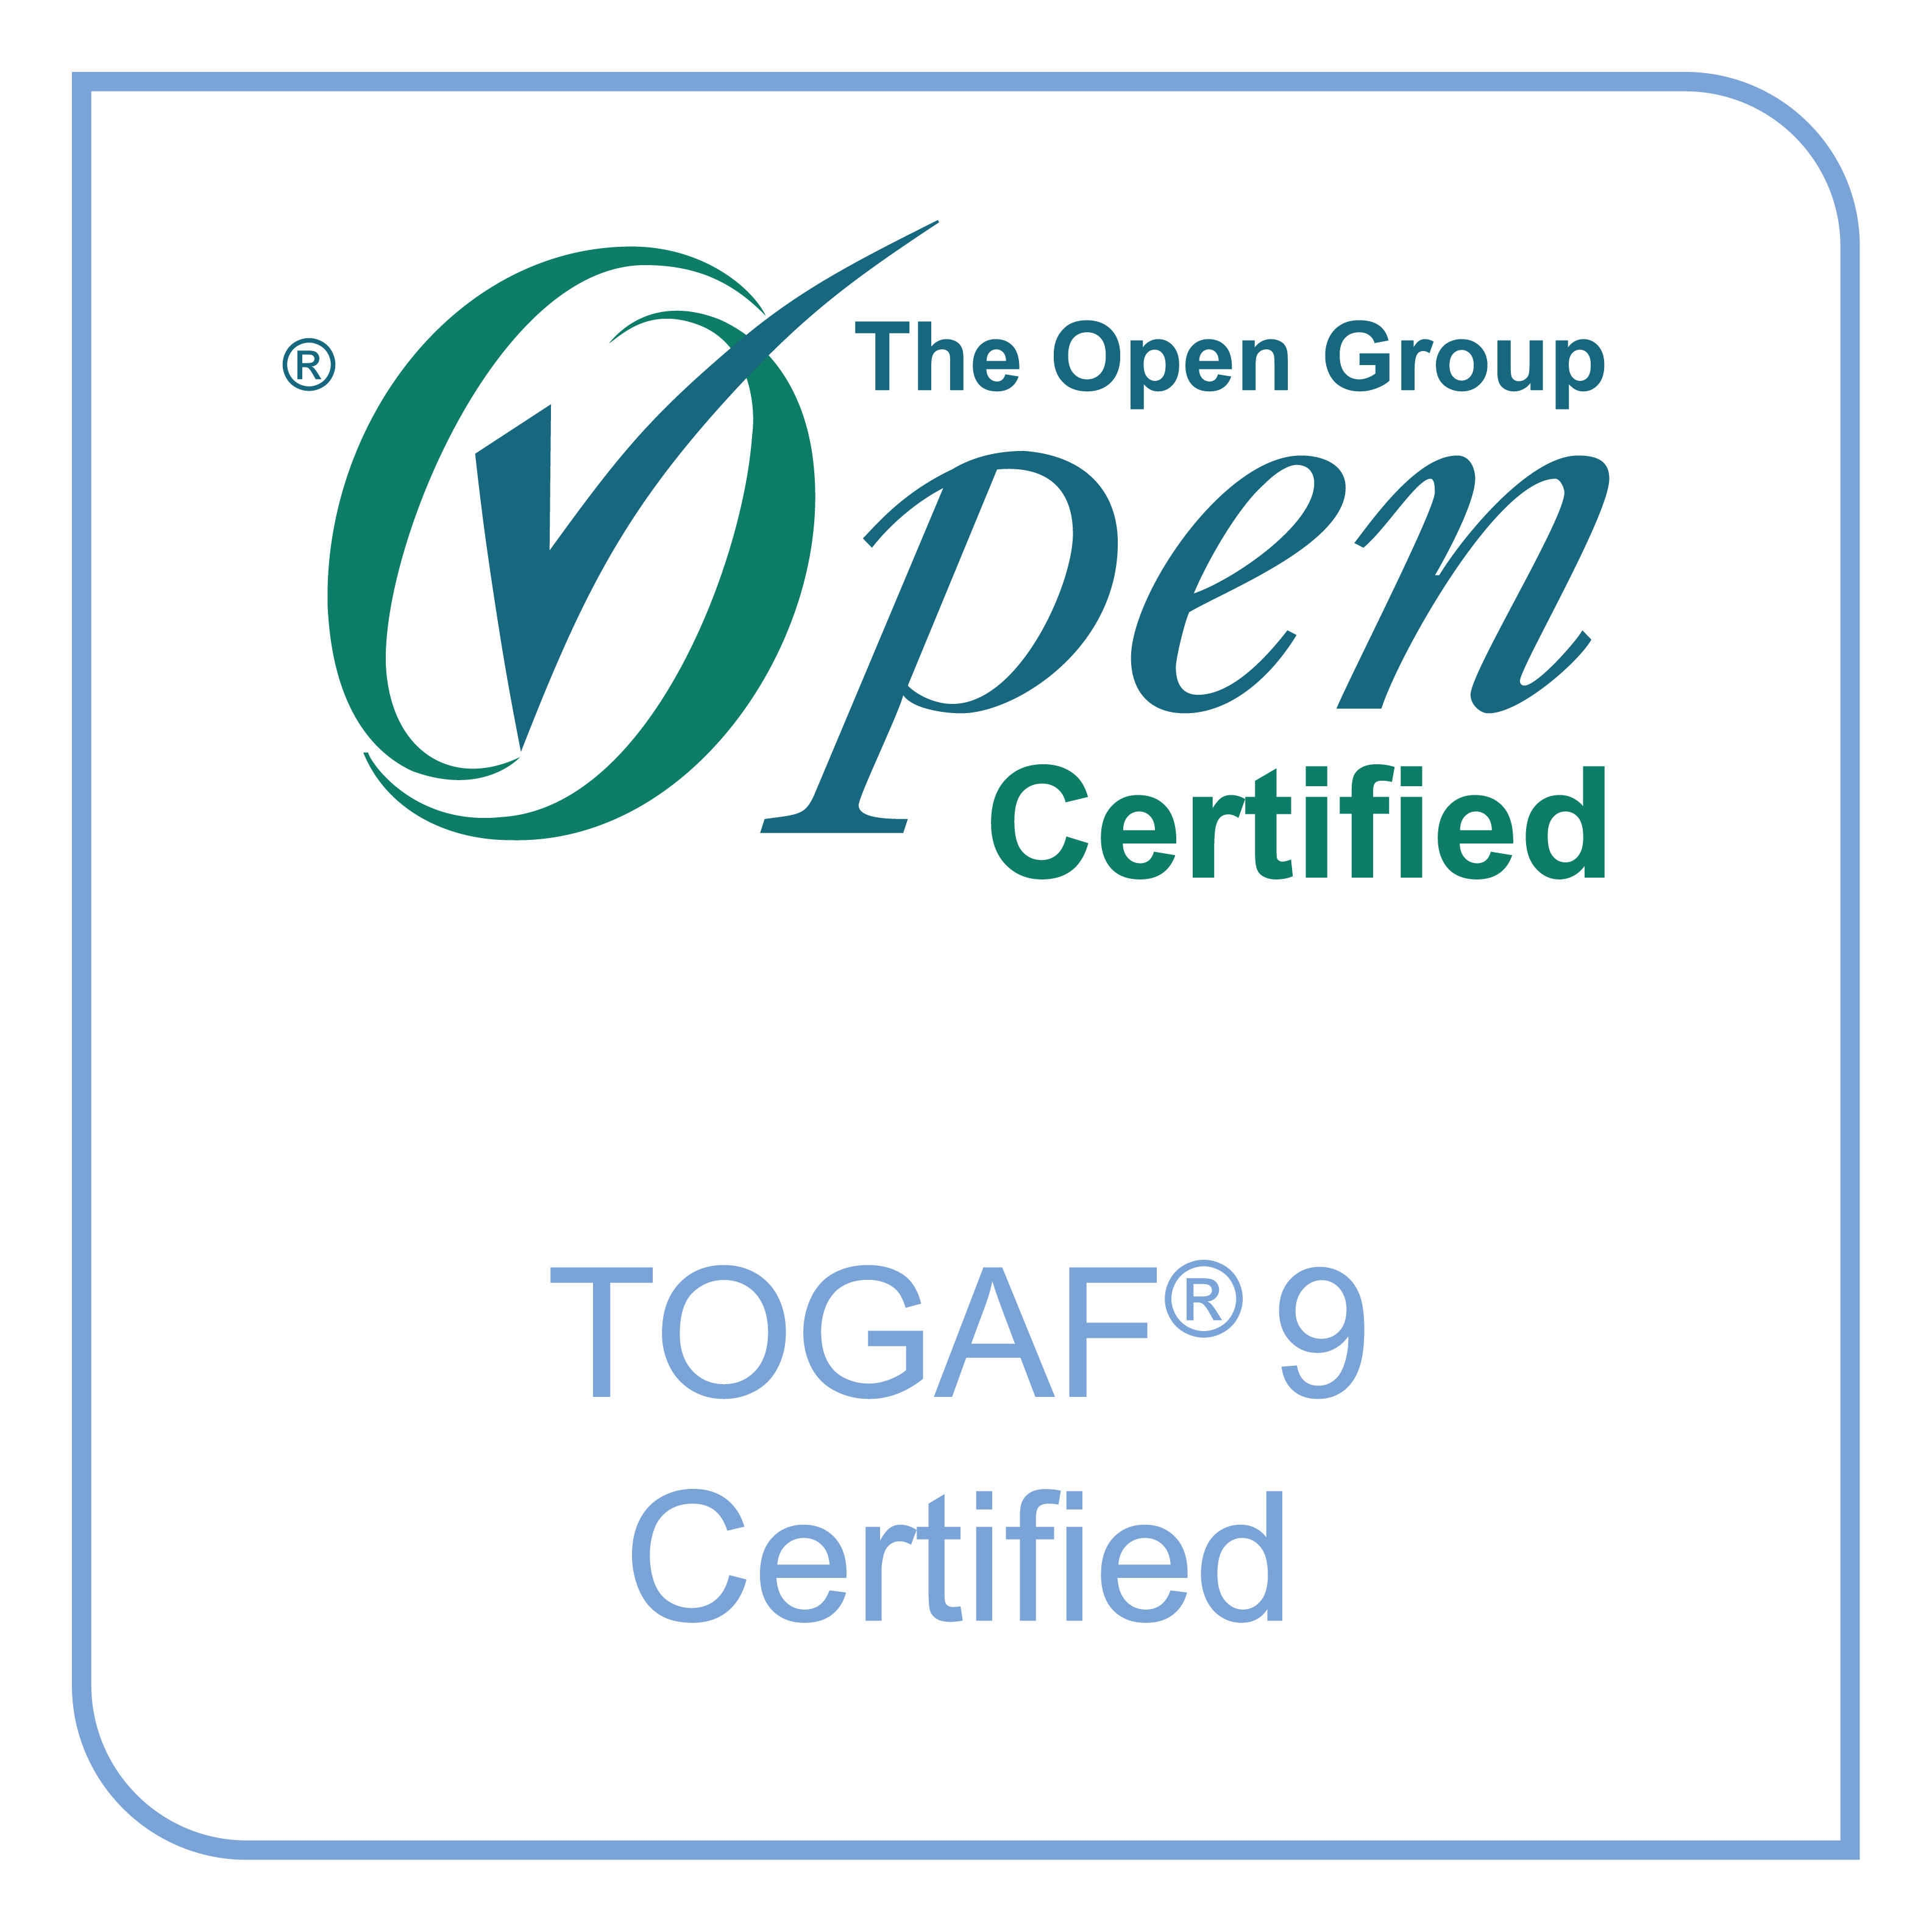 How to Prepare for TOGAF Certification